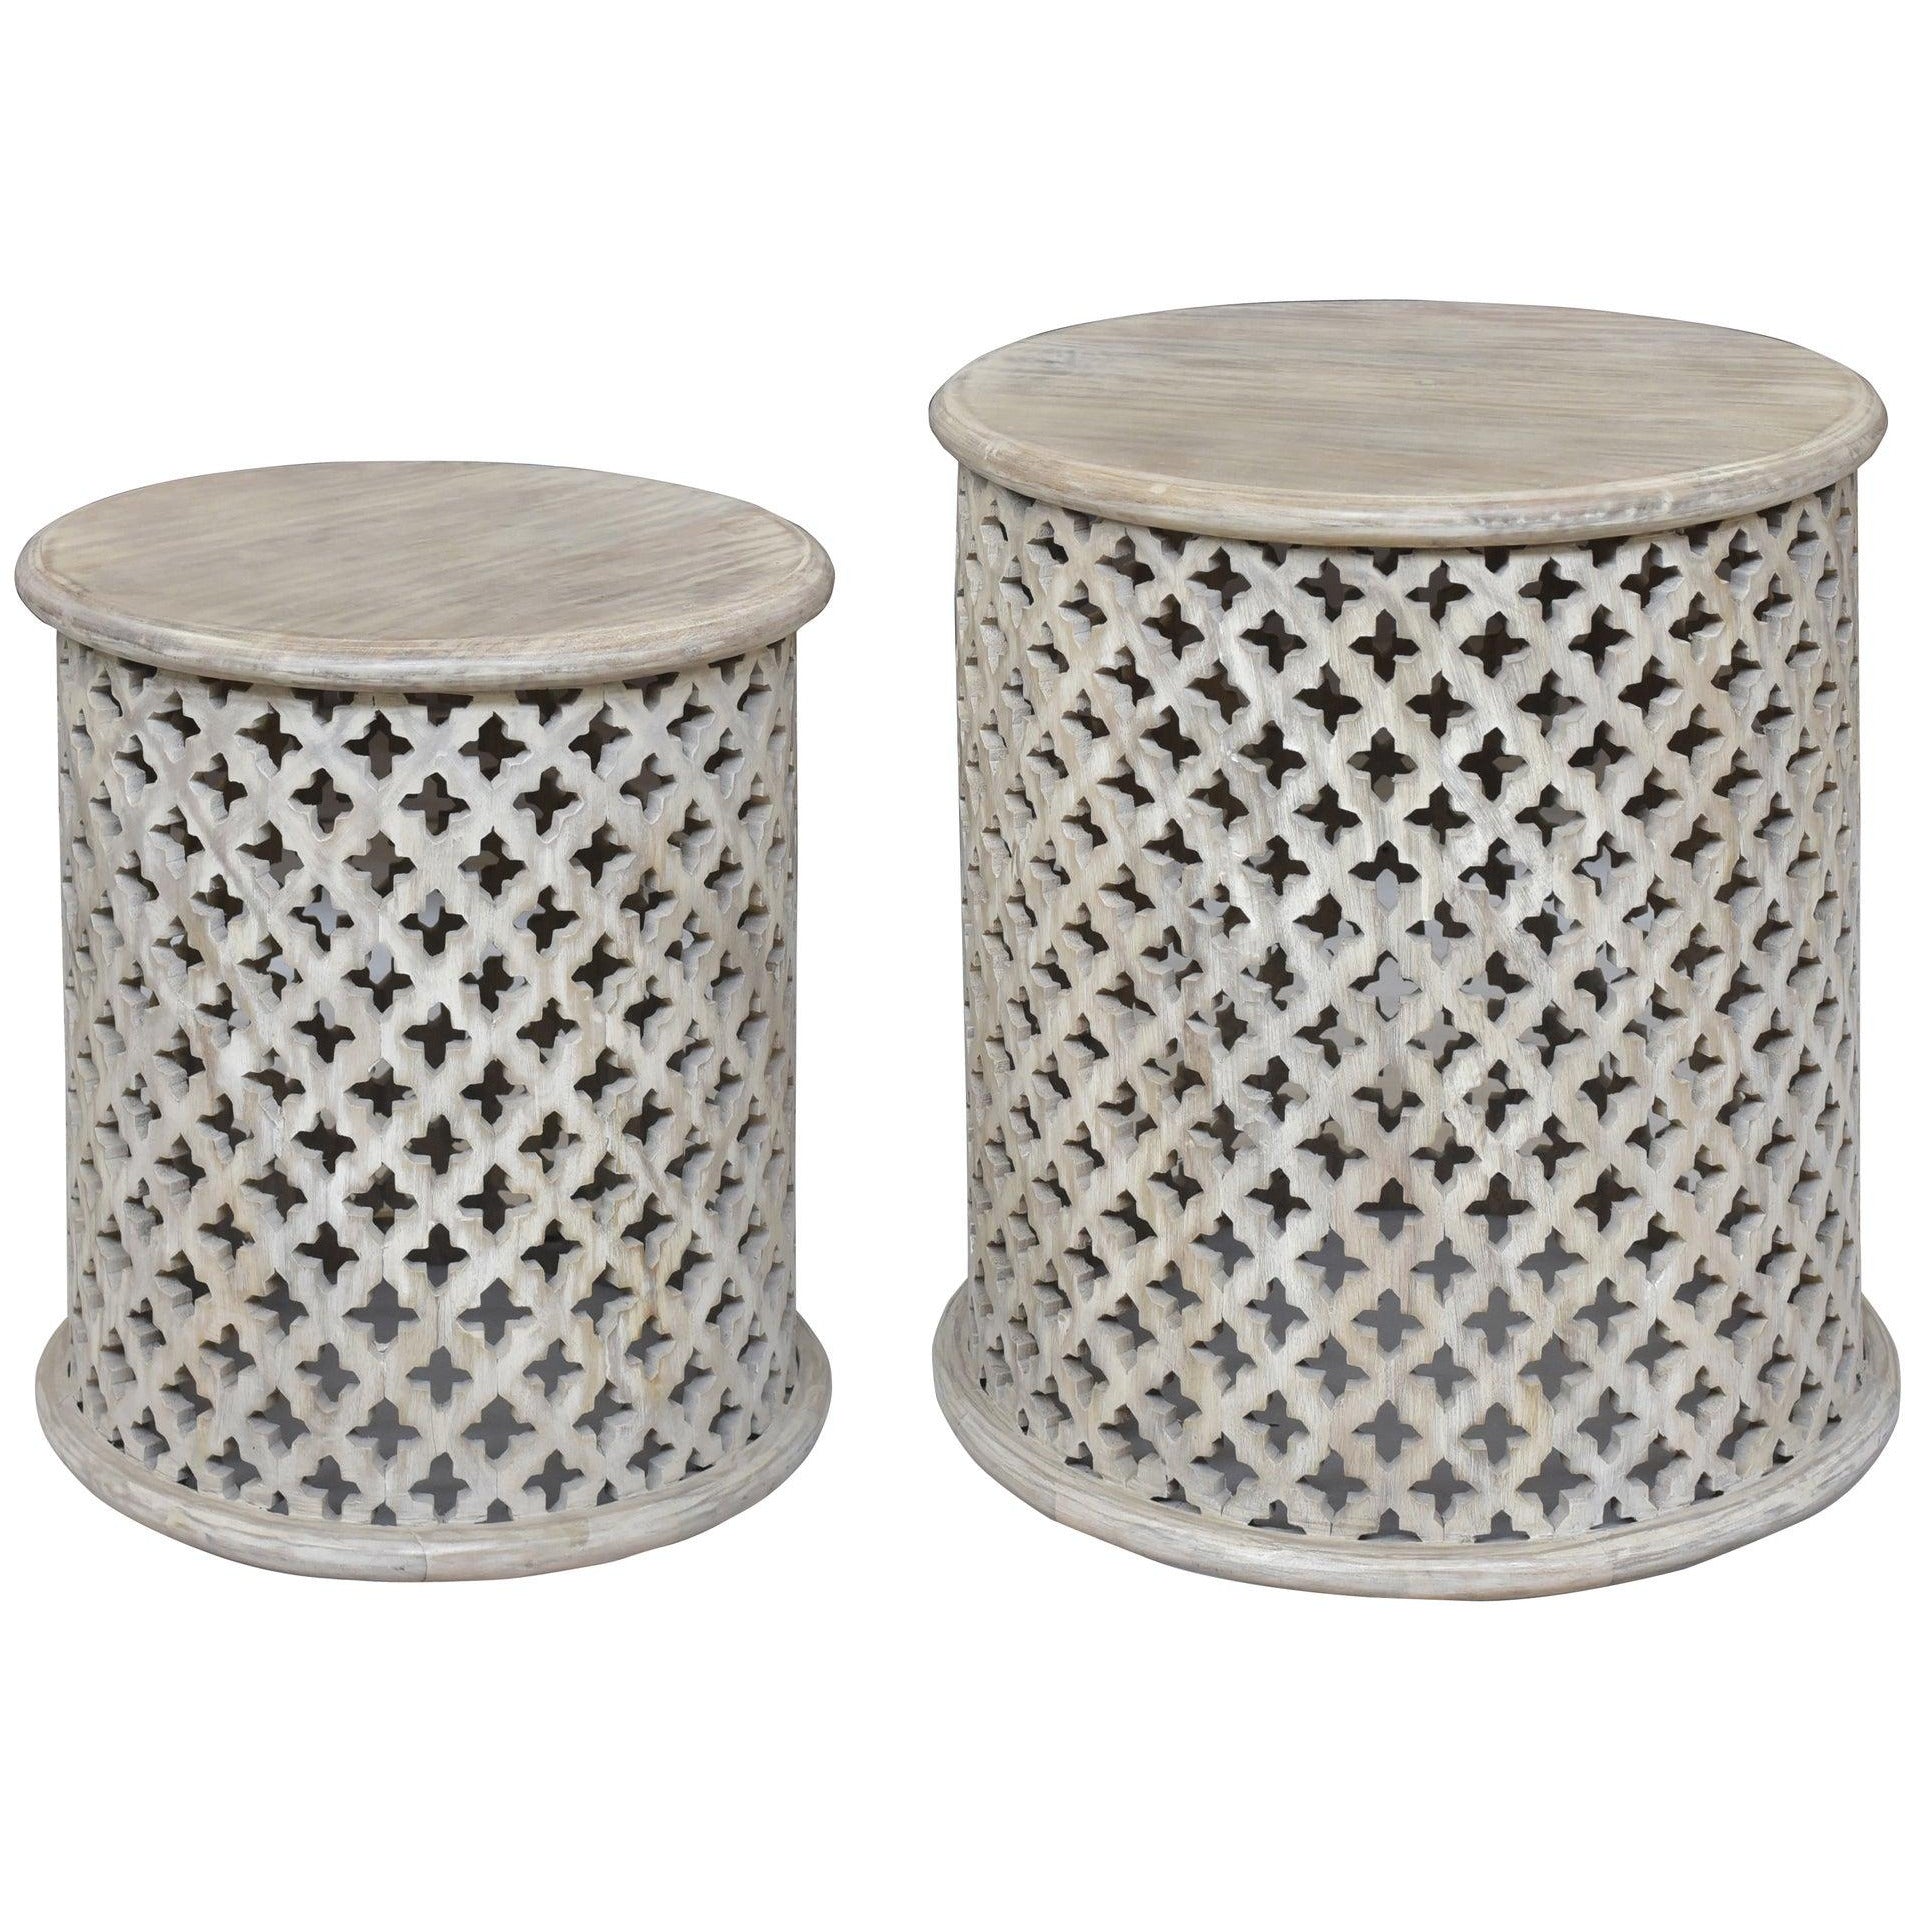 Midland Round End Tables (Set of 2)